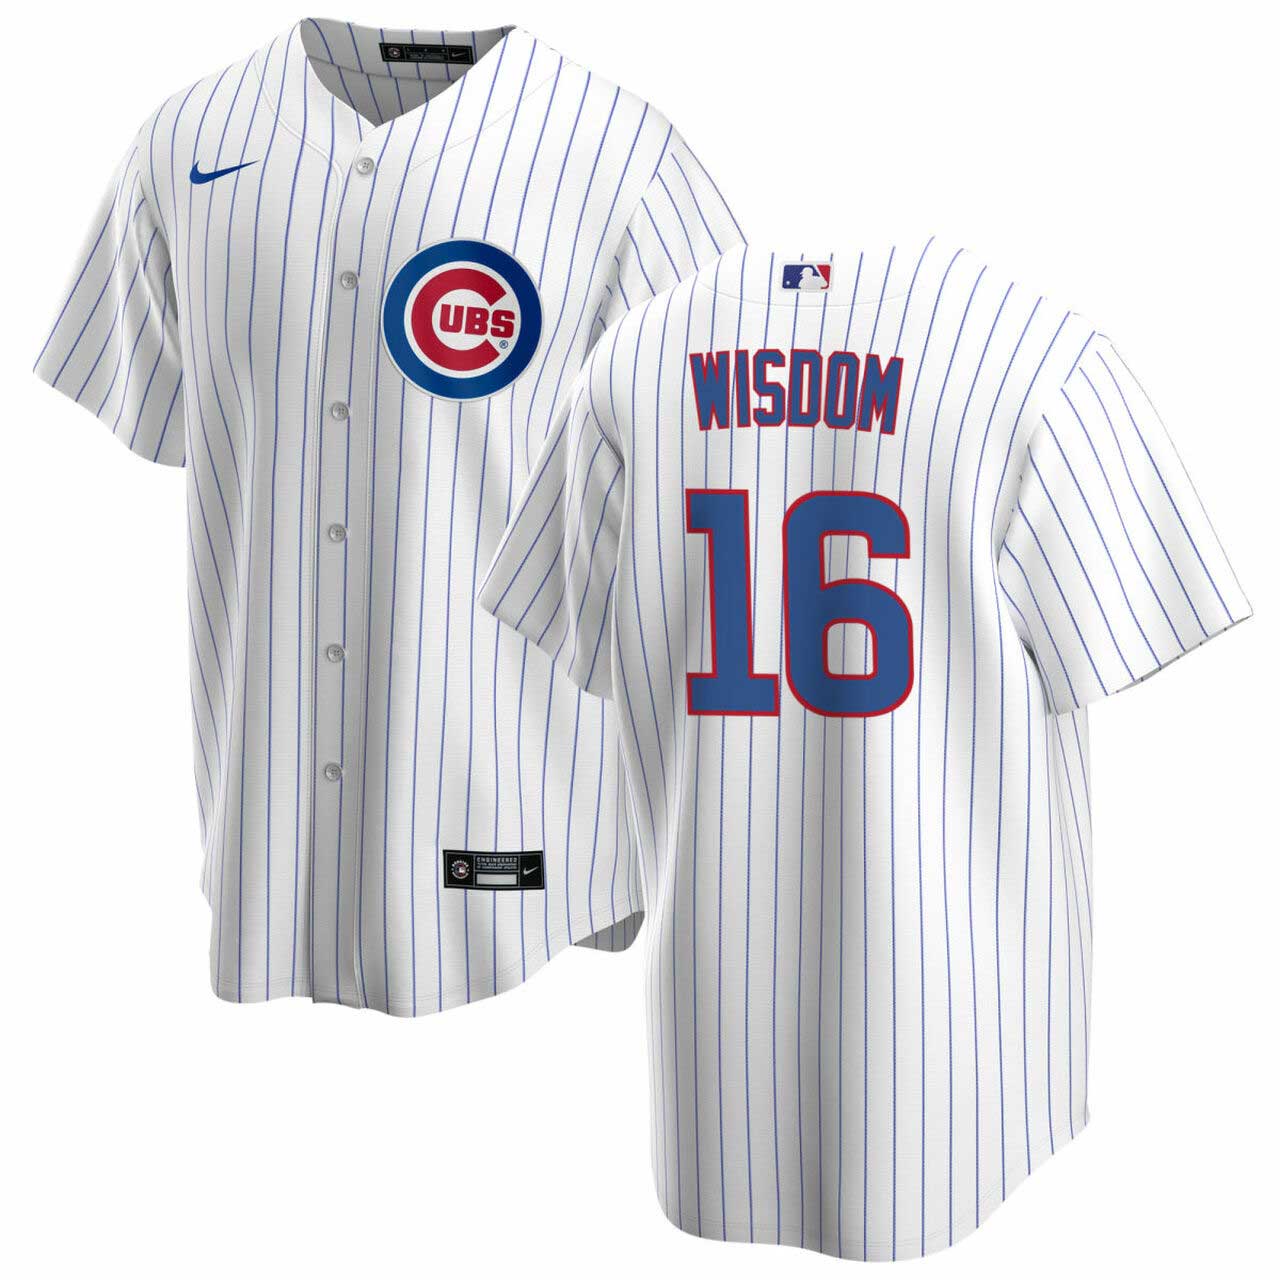 Youth Patrick Wisdom Royal Chicago Cubs Player Logo Jersey Size: 2XL